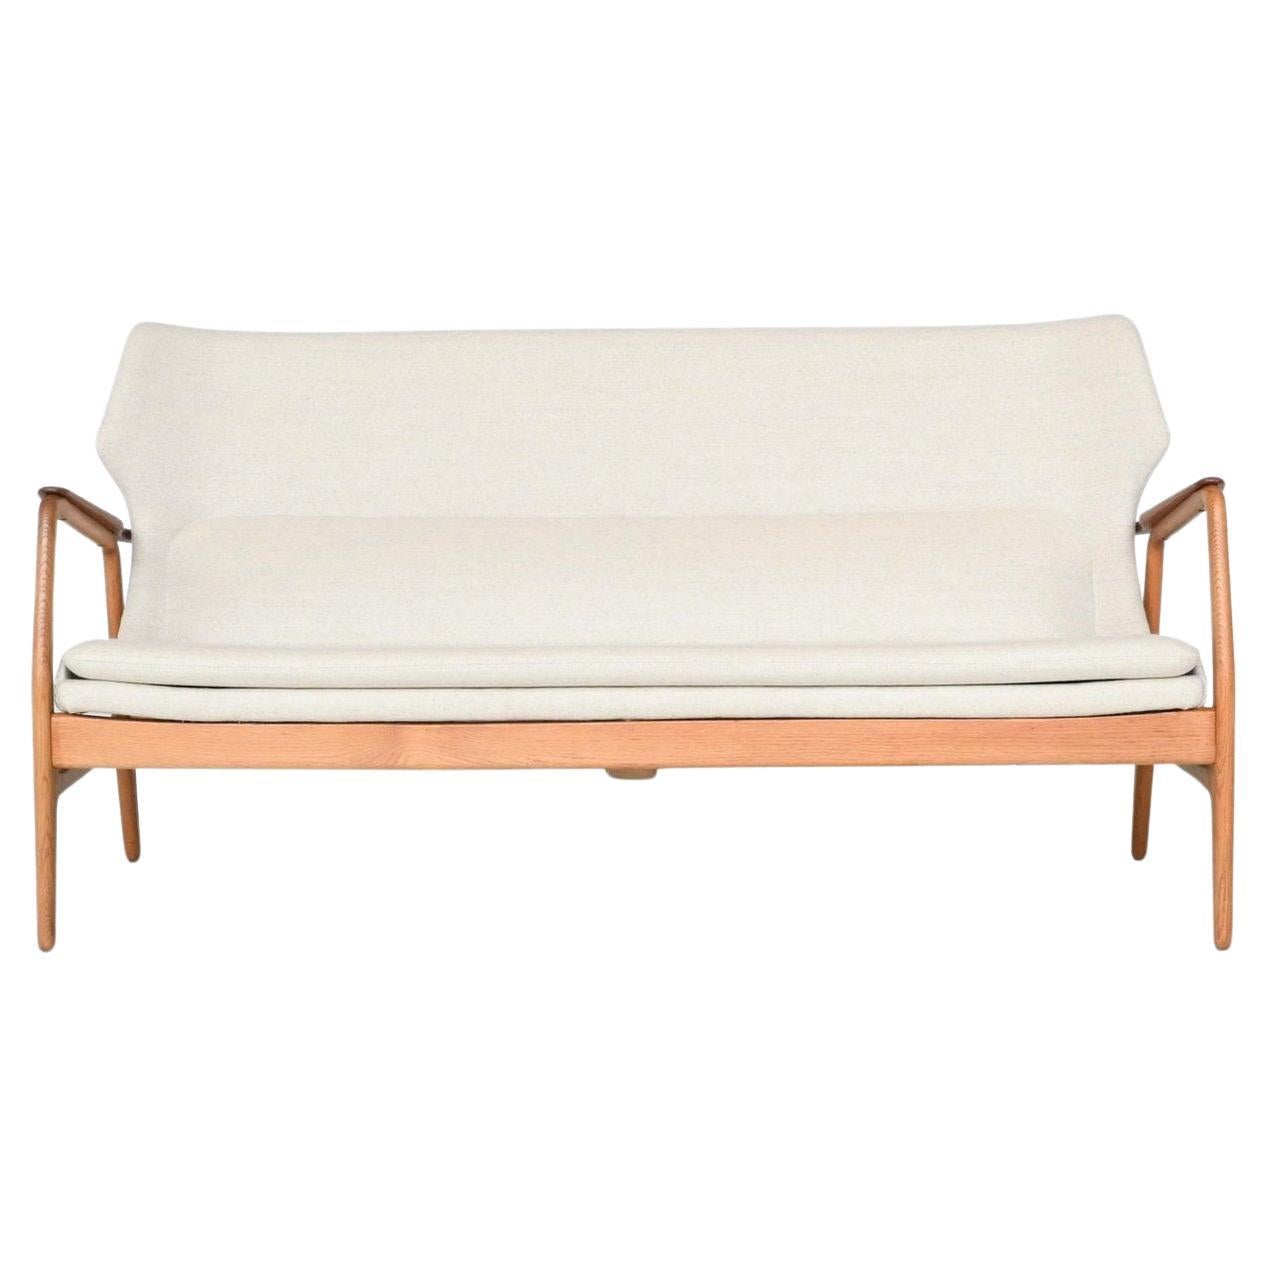 A. Madsen & H. Schubell Wingback sofa in cream Bovenkamp The Netherlands 1960 For Sale